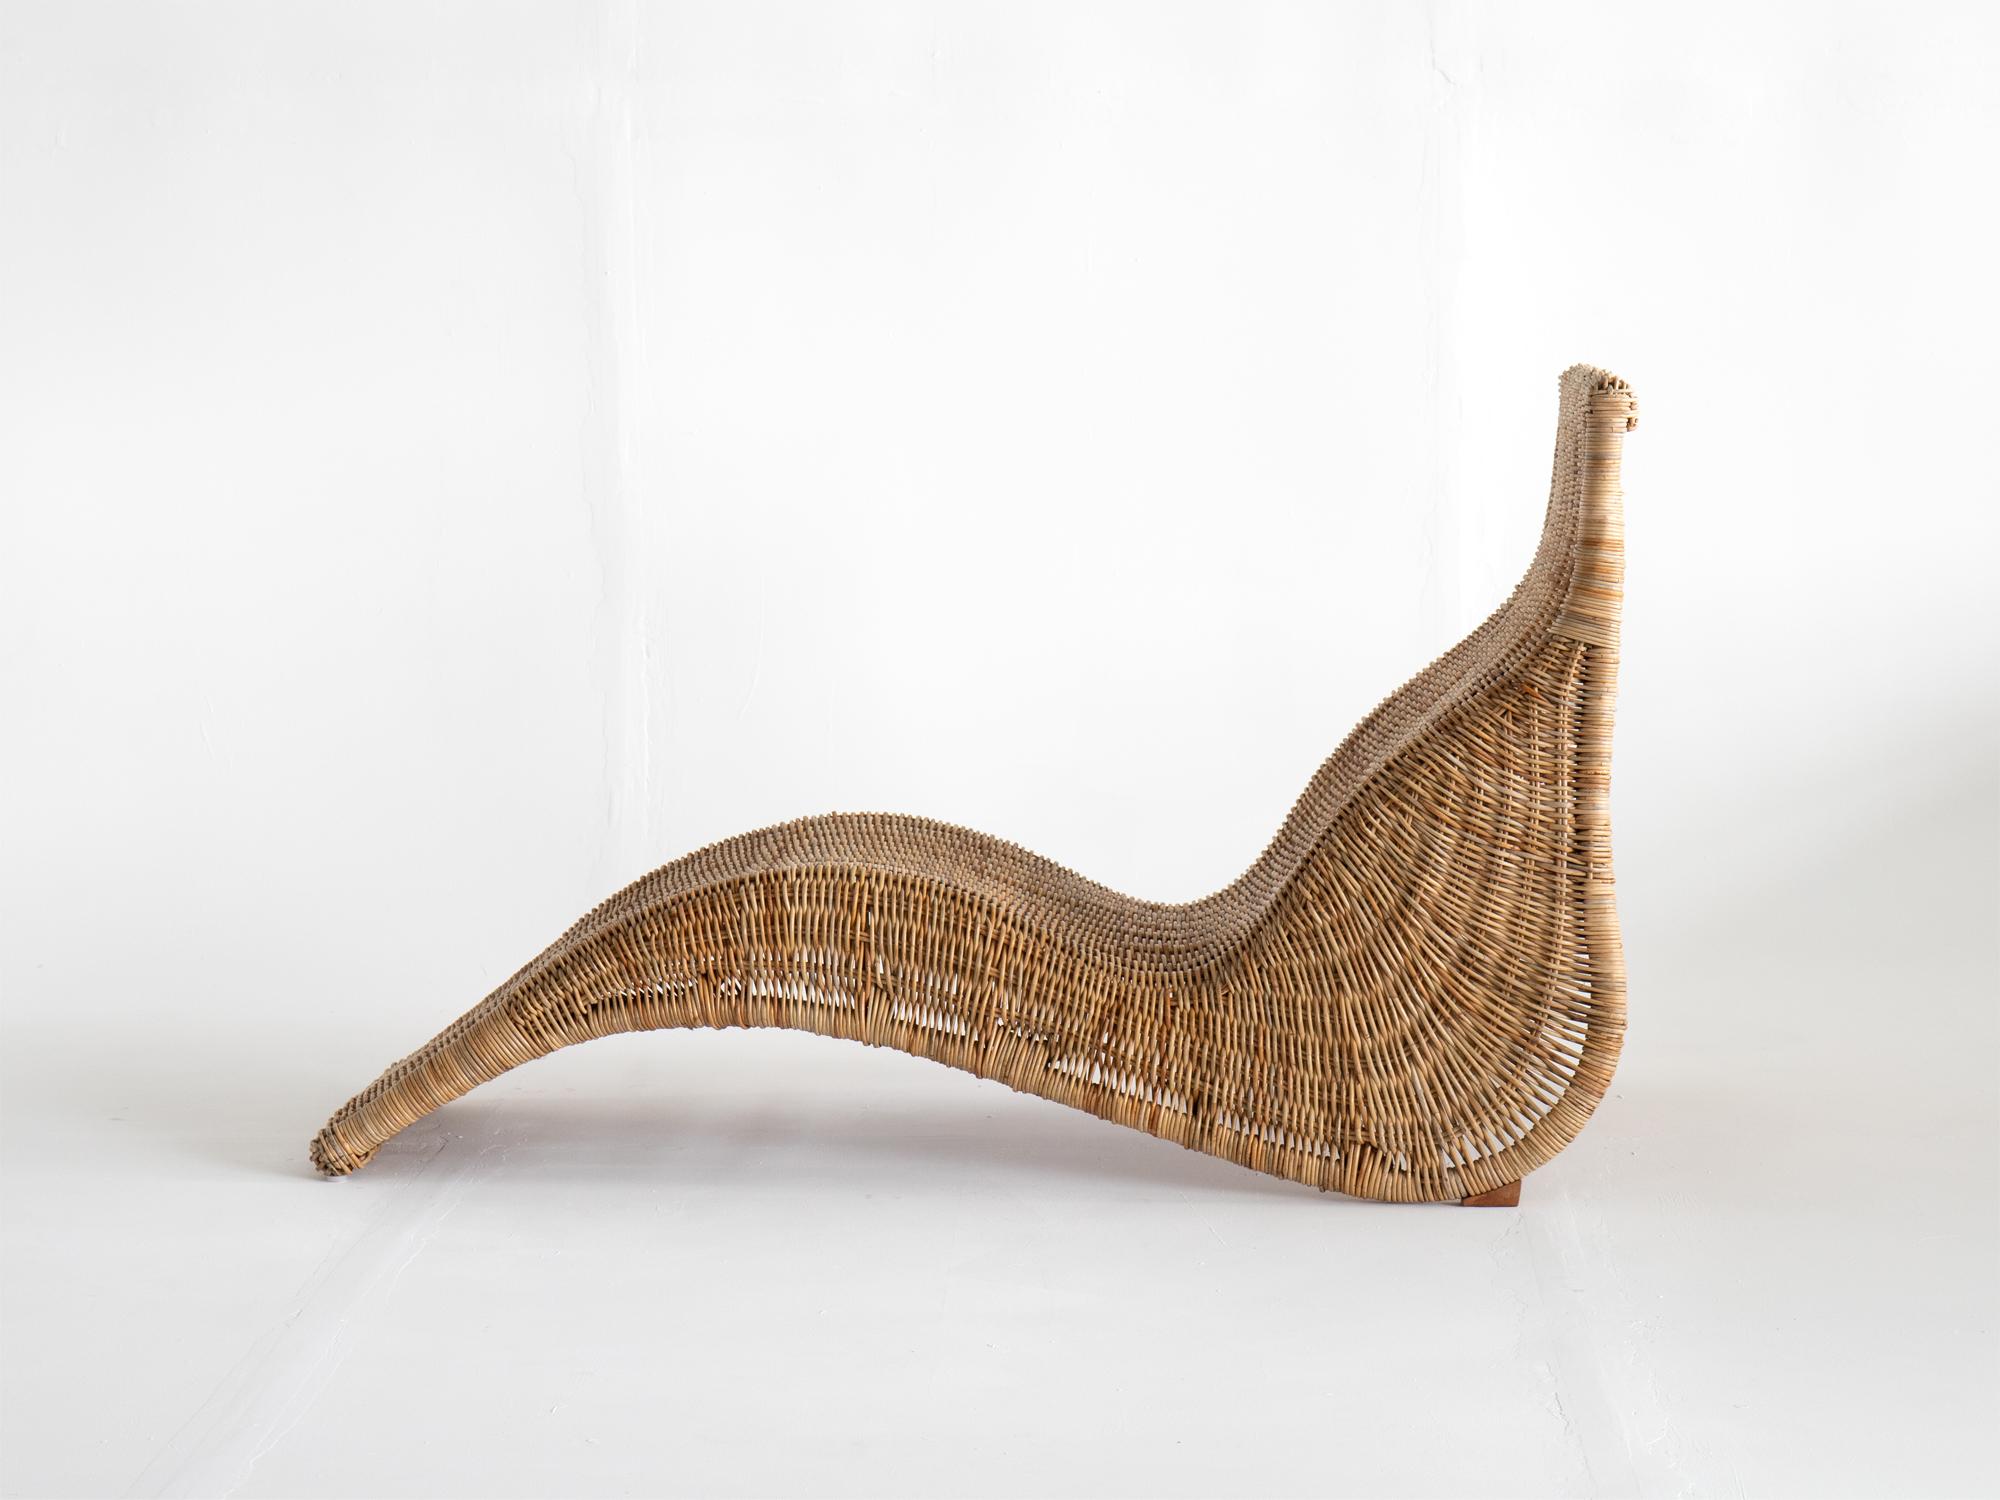 A Karlskrona lounge chair designed by Carl Öjerstam for Ikea, 1990s.

Wicker work over a bamboo frame.